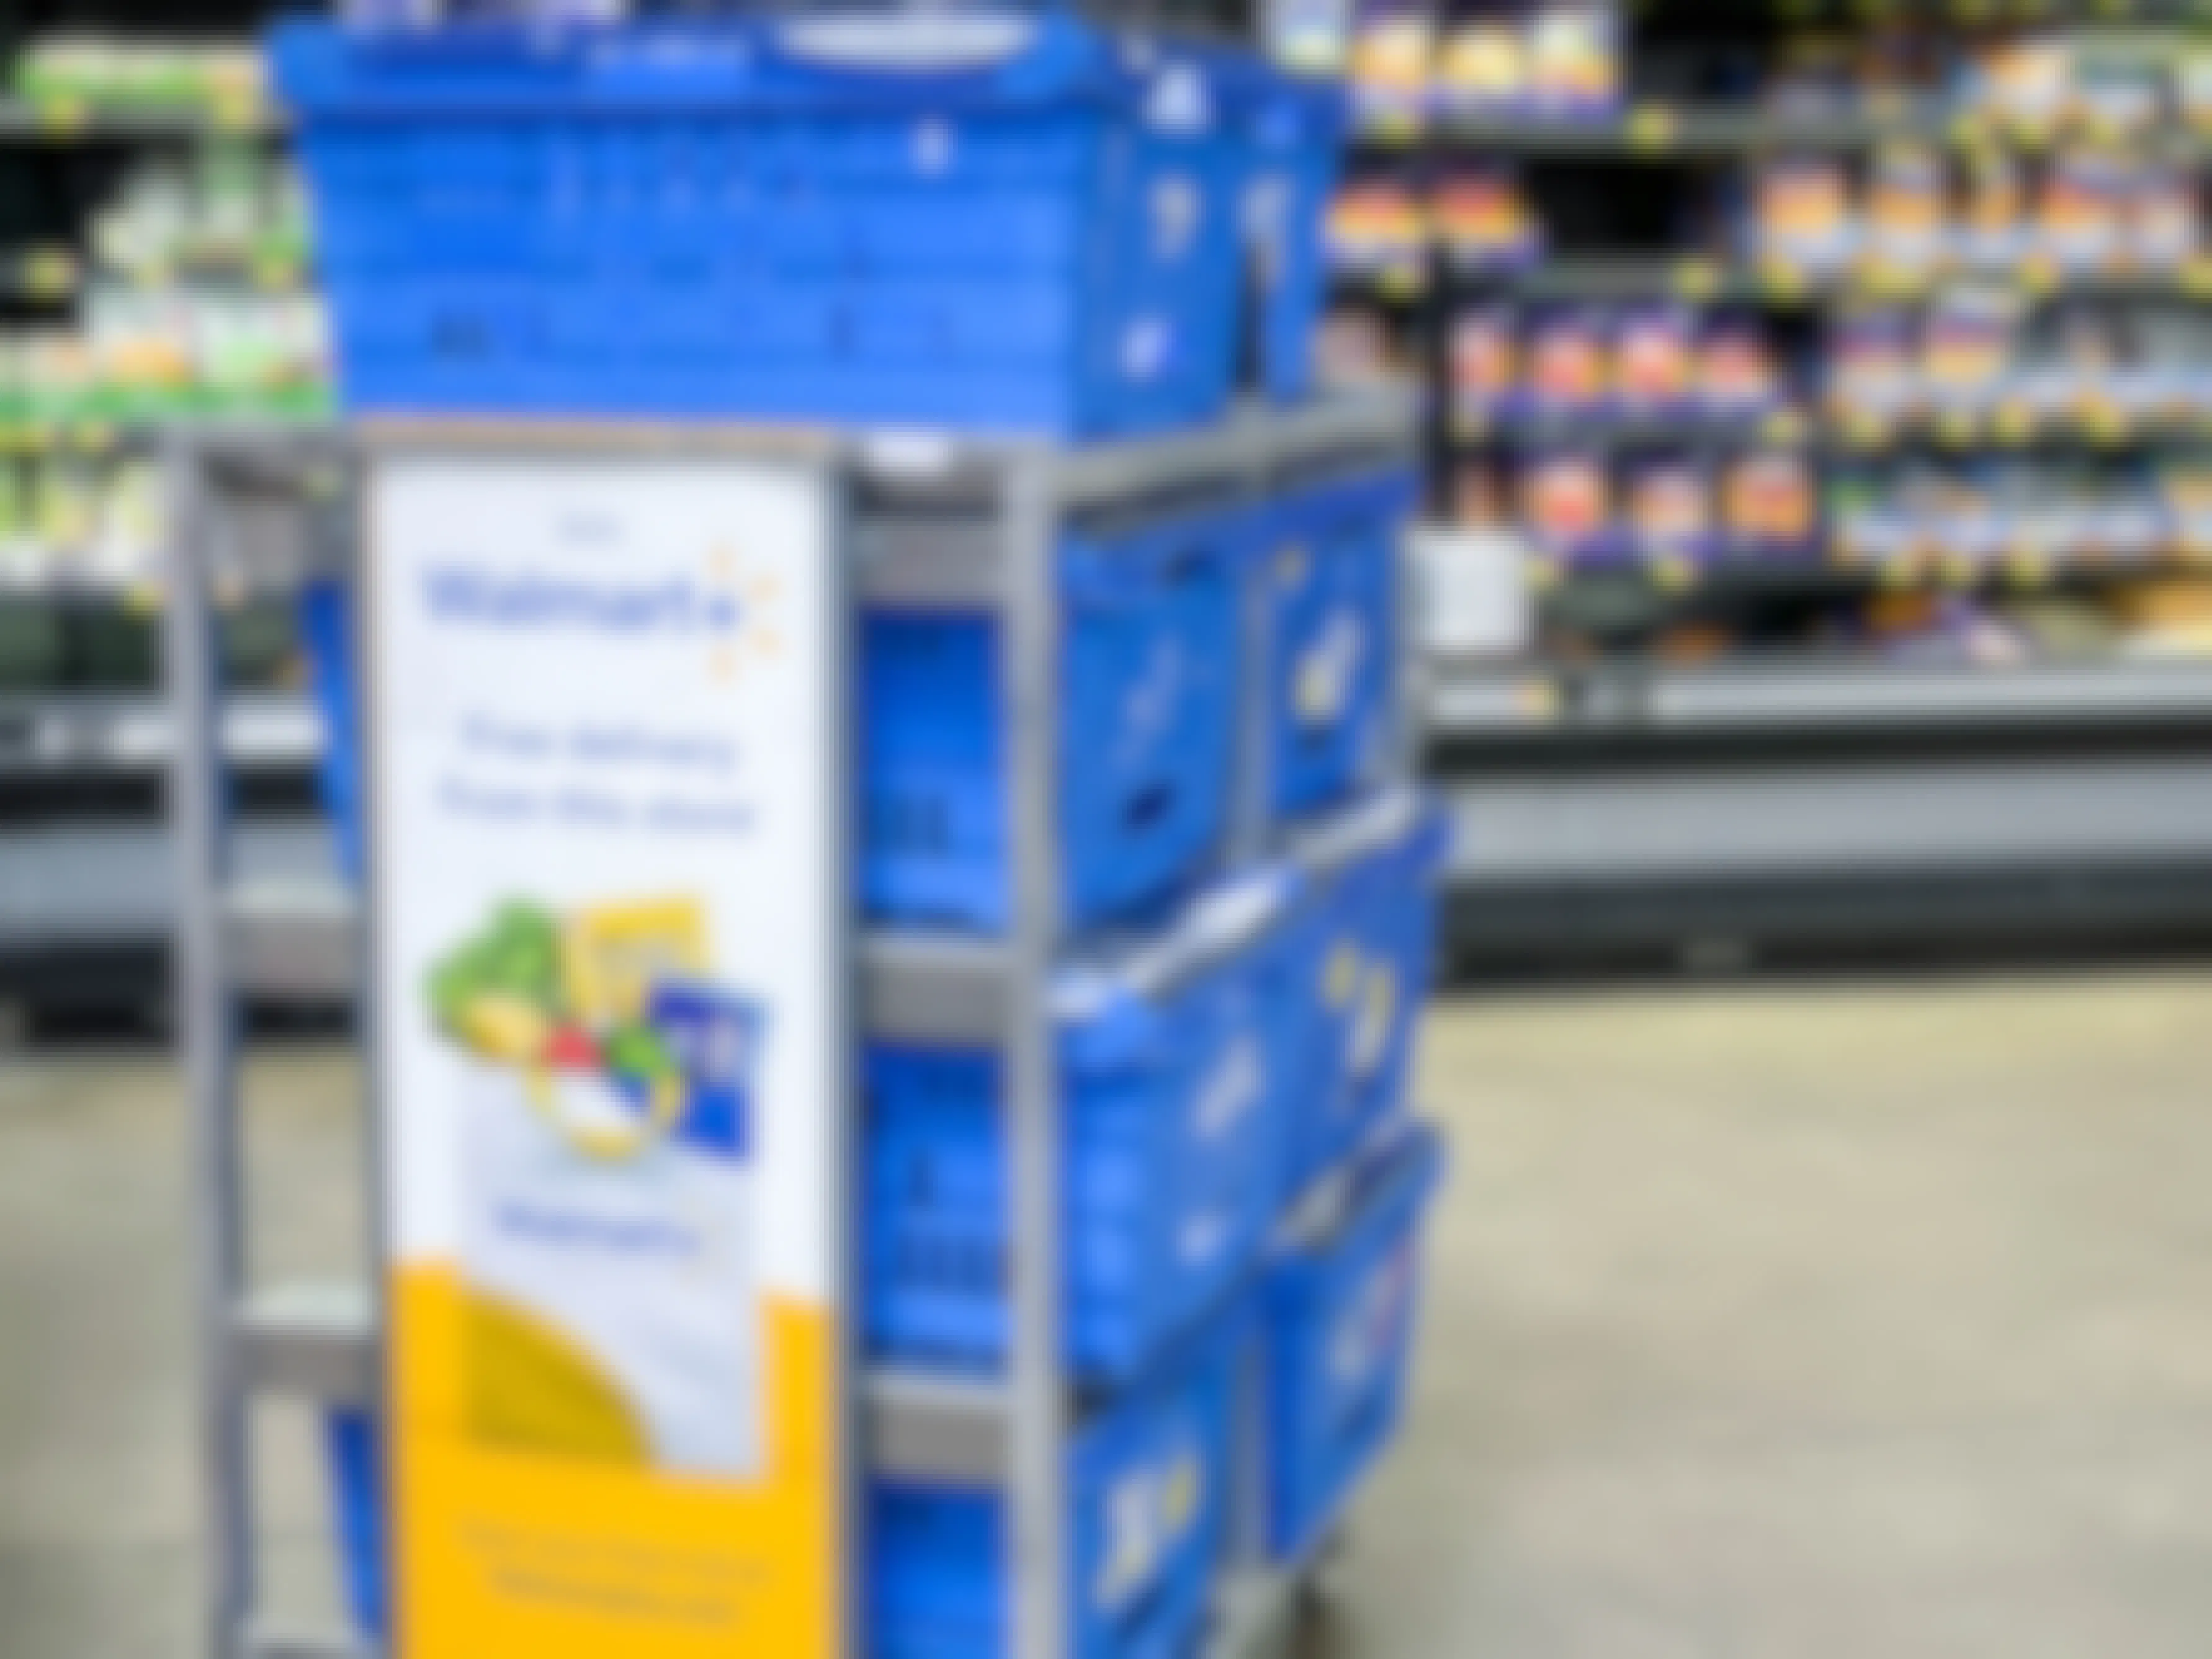 walmart plus sign in store on employee basket advertising free delivery and free trial of Walmart plus